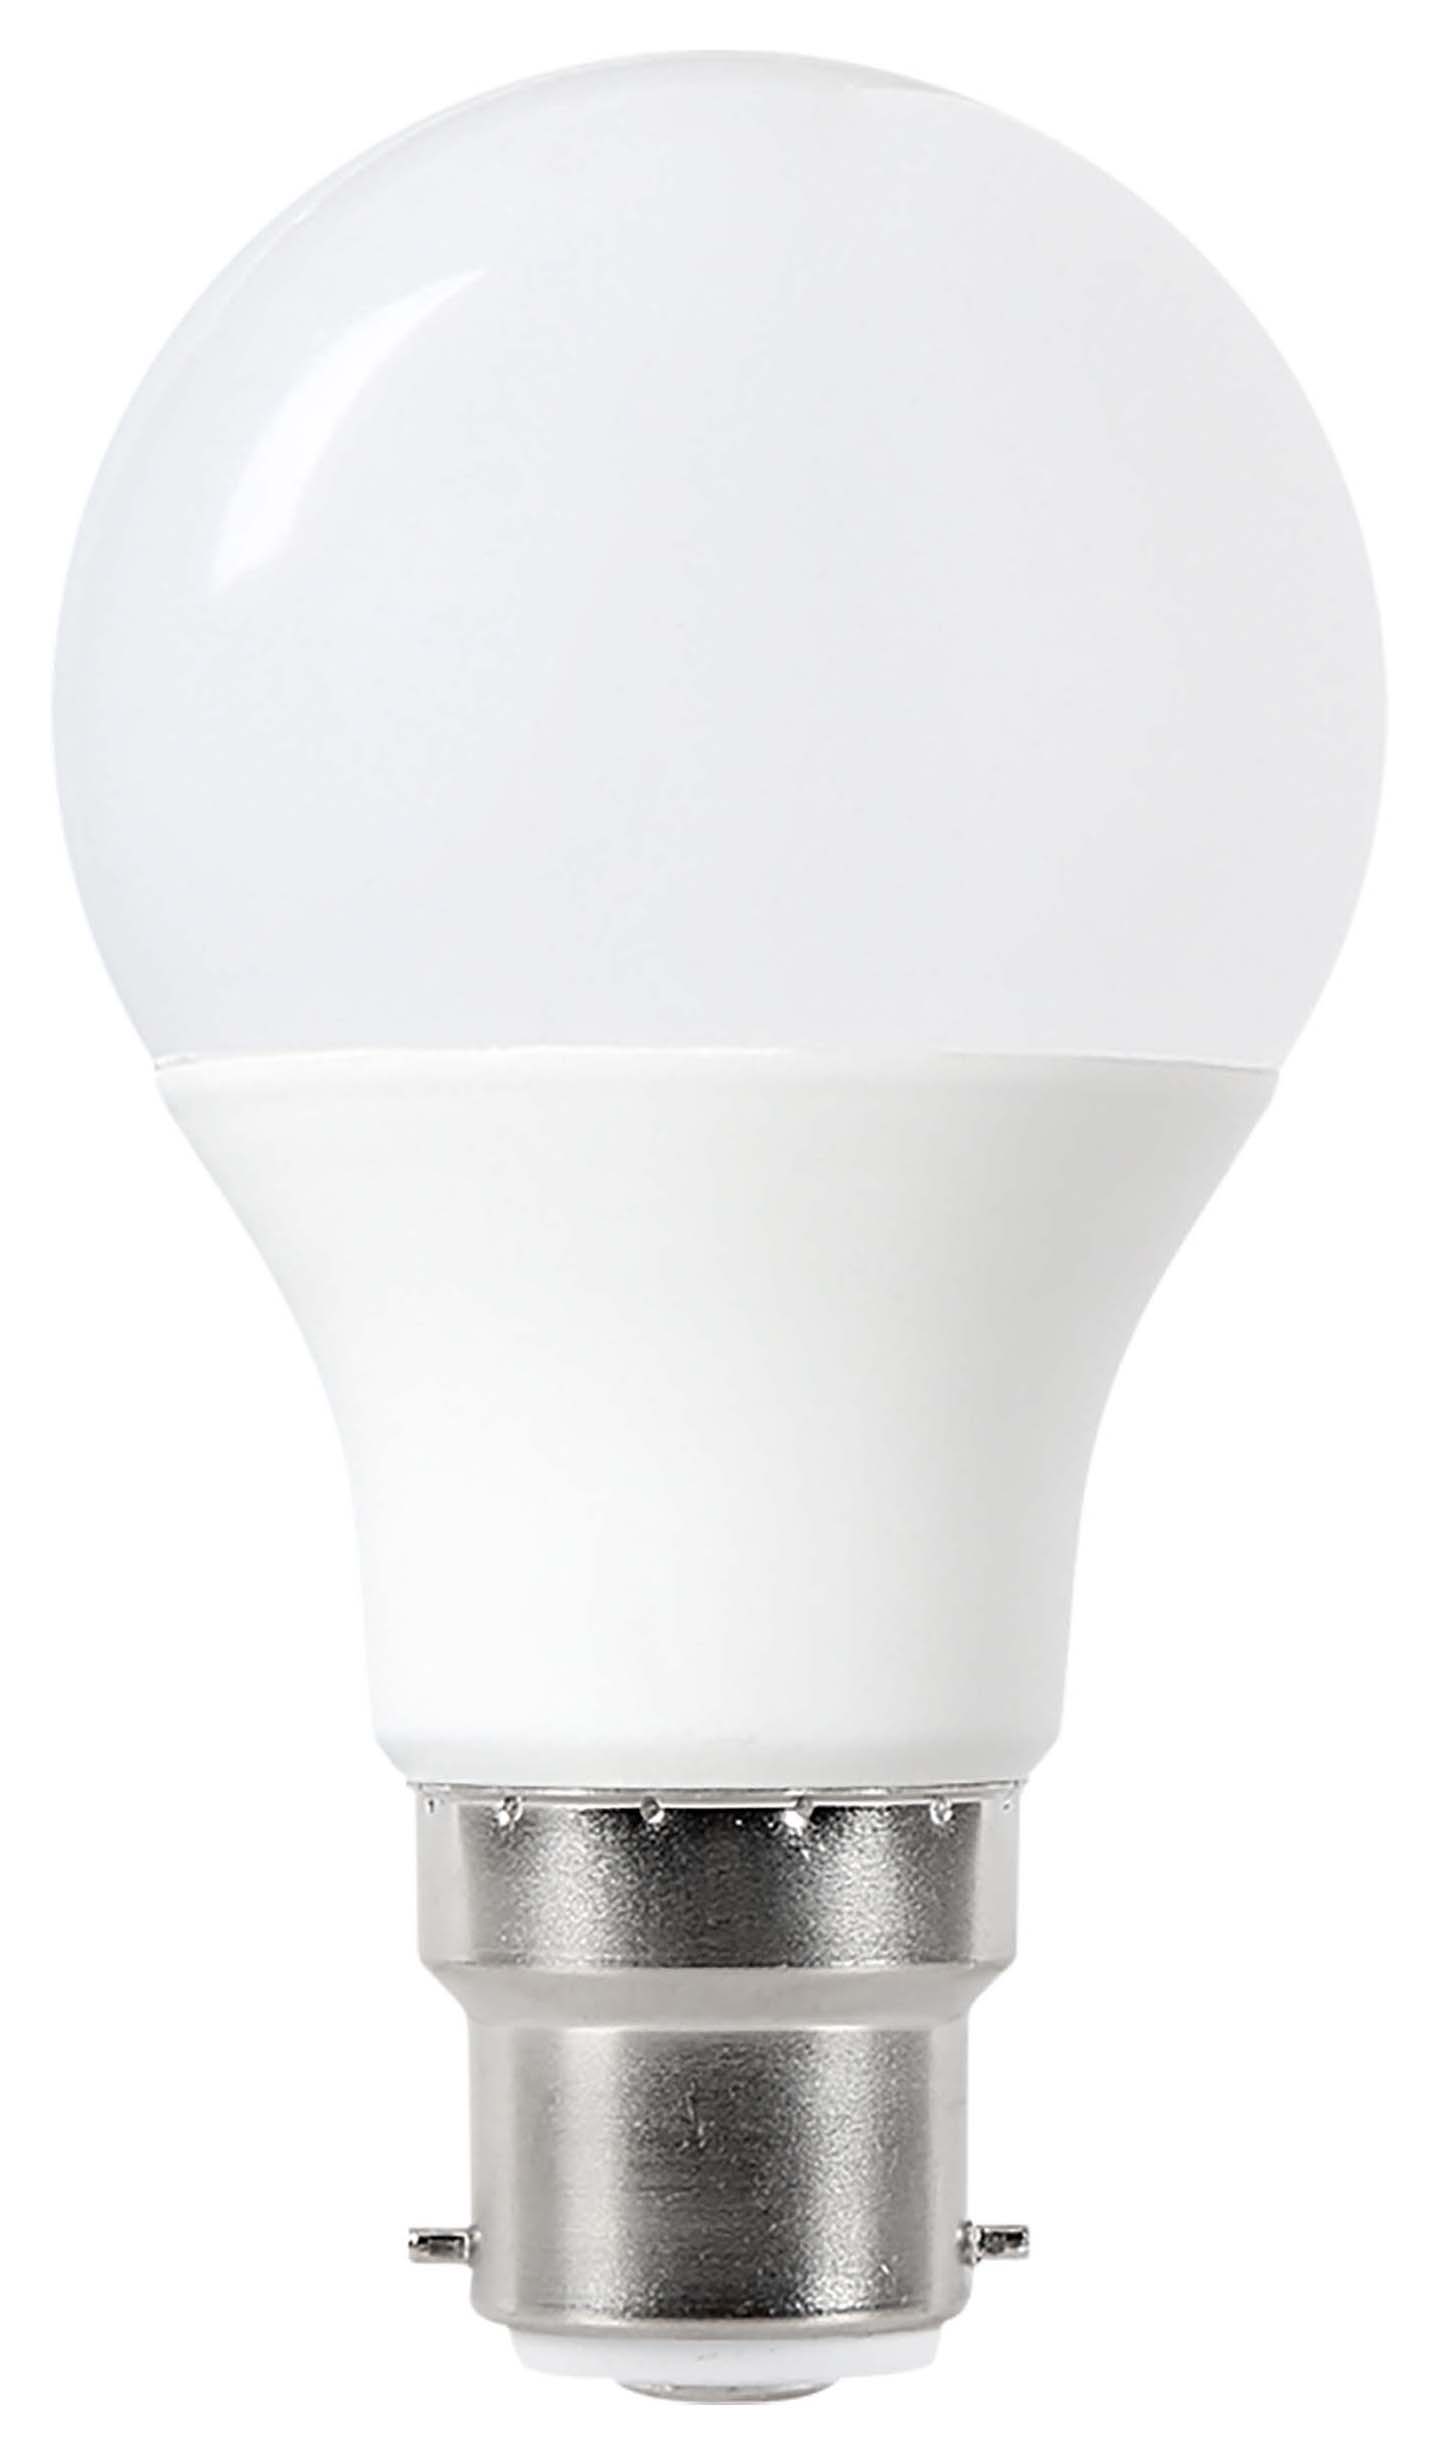 Image of Wickes Non-Dimmable GLS Opal LED B22 8.8W Warm White Light Bulb - Pack of 4